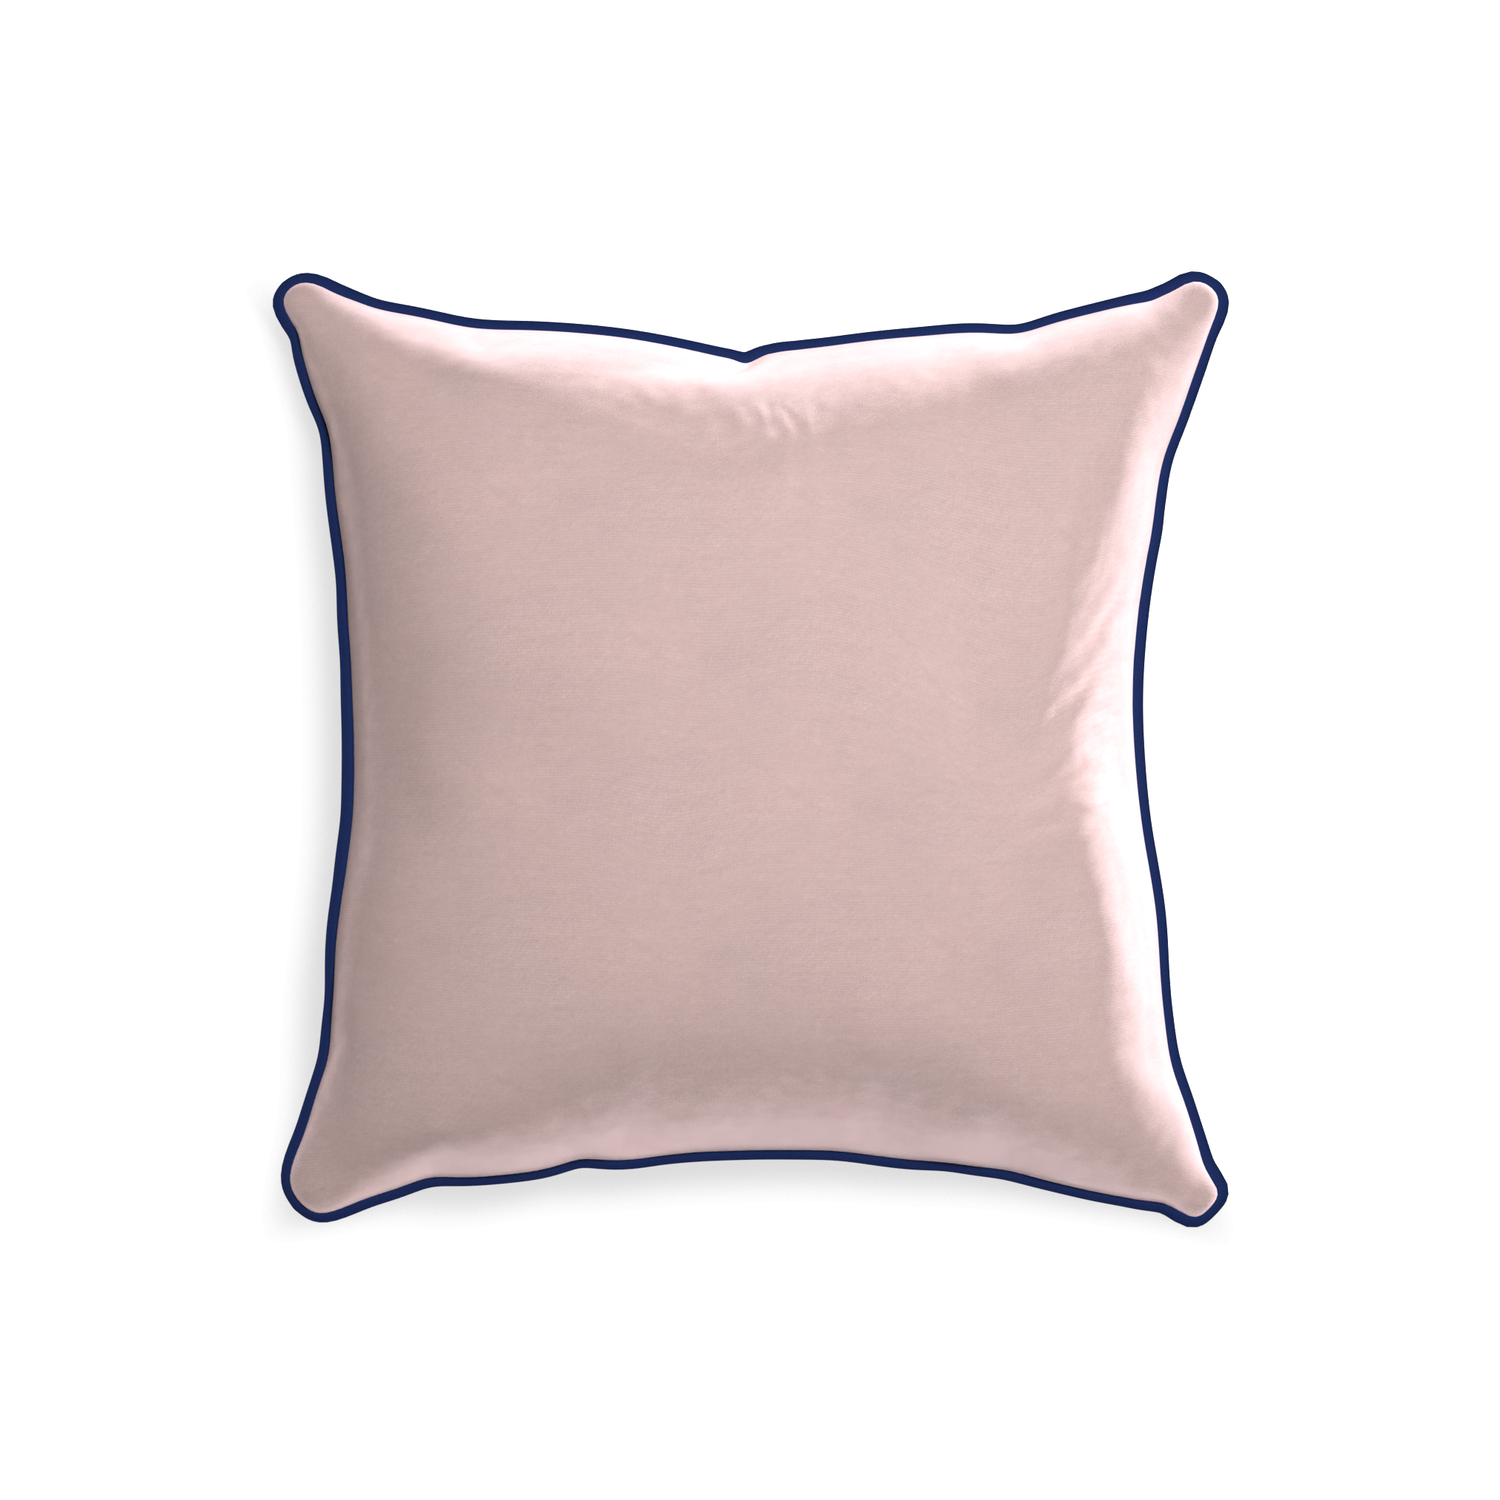 20-square rose velvet custom pillow with midnight piping on white background